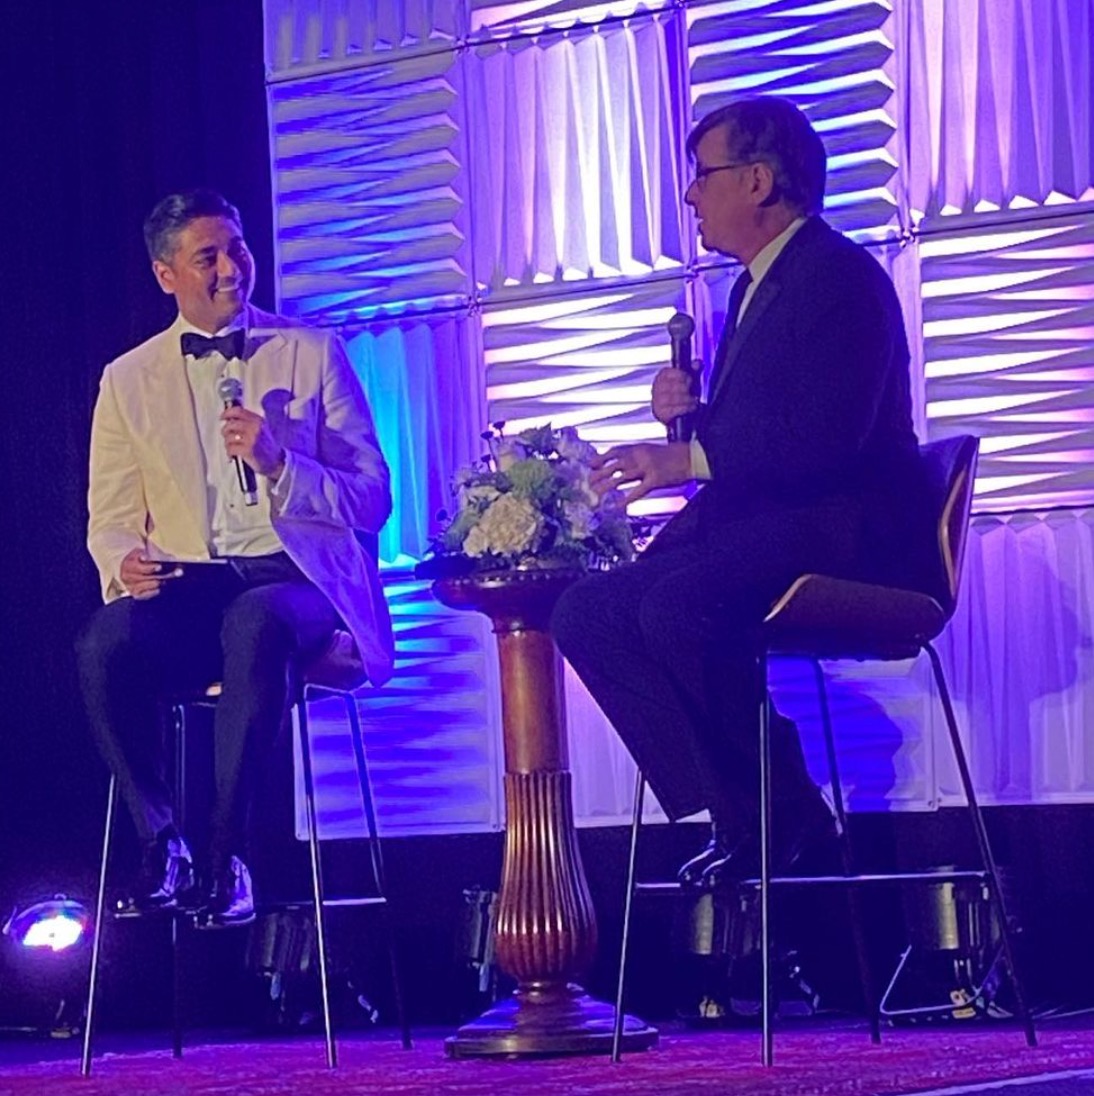 Aftab Pureval interviewing Aaron Sorkin for the Niehoff Lecture at the Hyatt Hotel